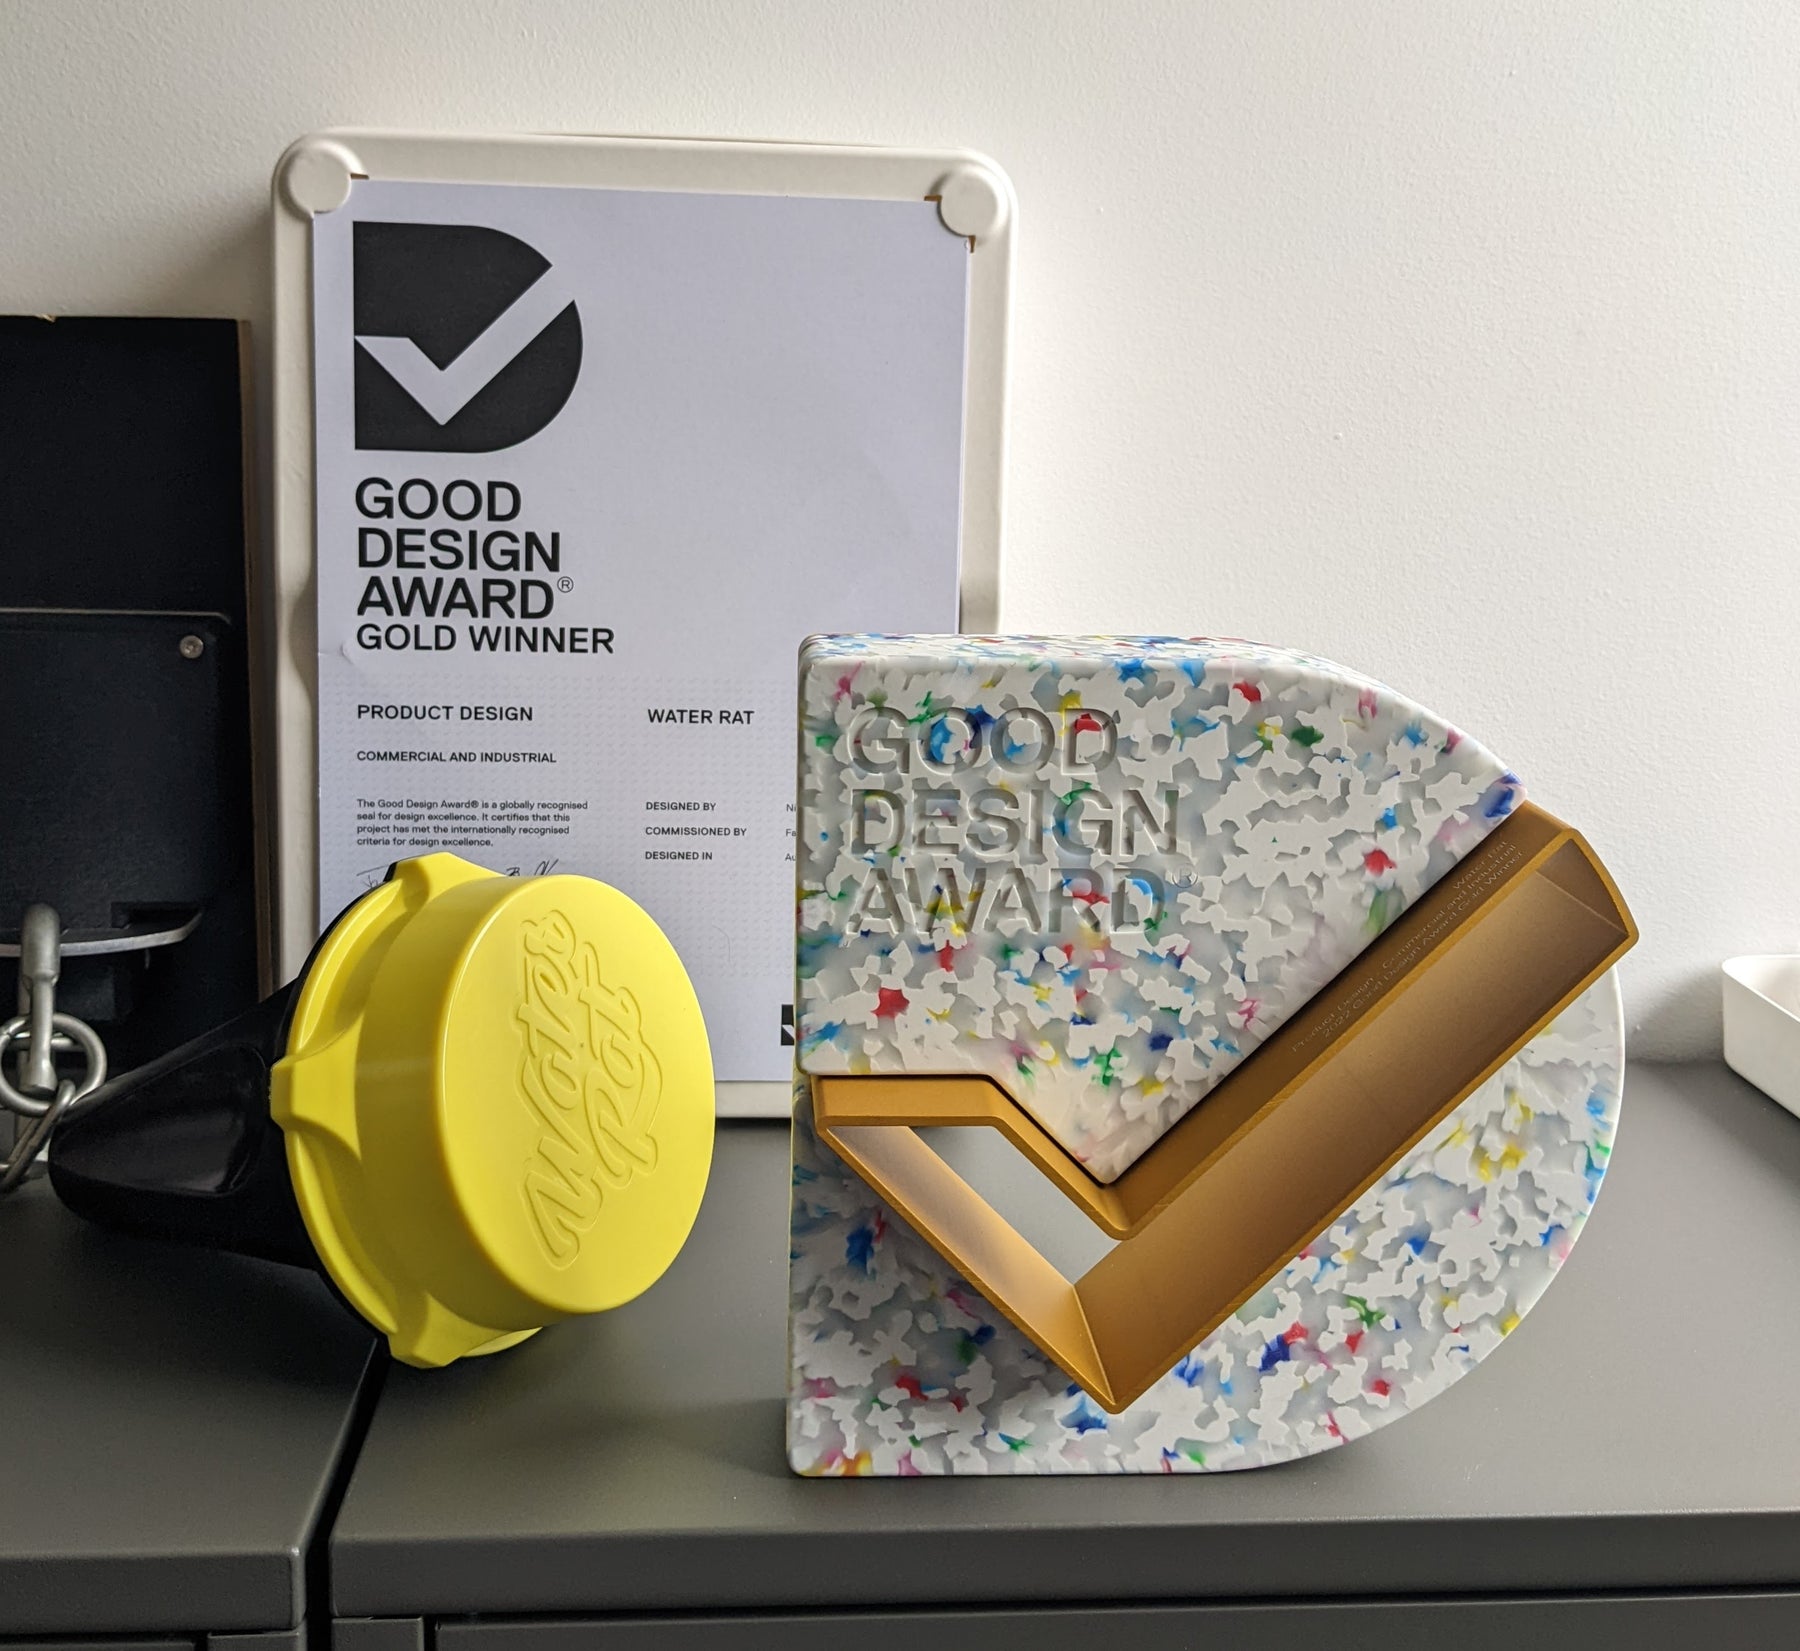 Good Design Award Gold Winner - Commercial and Industrial Product Design